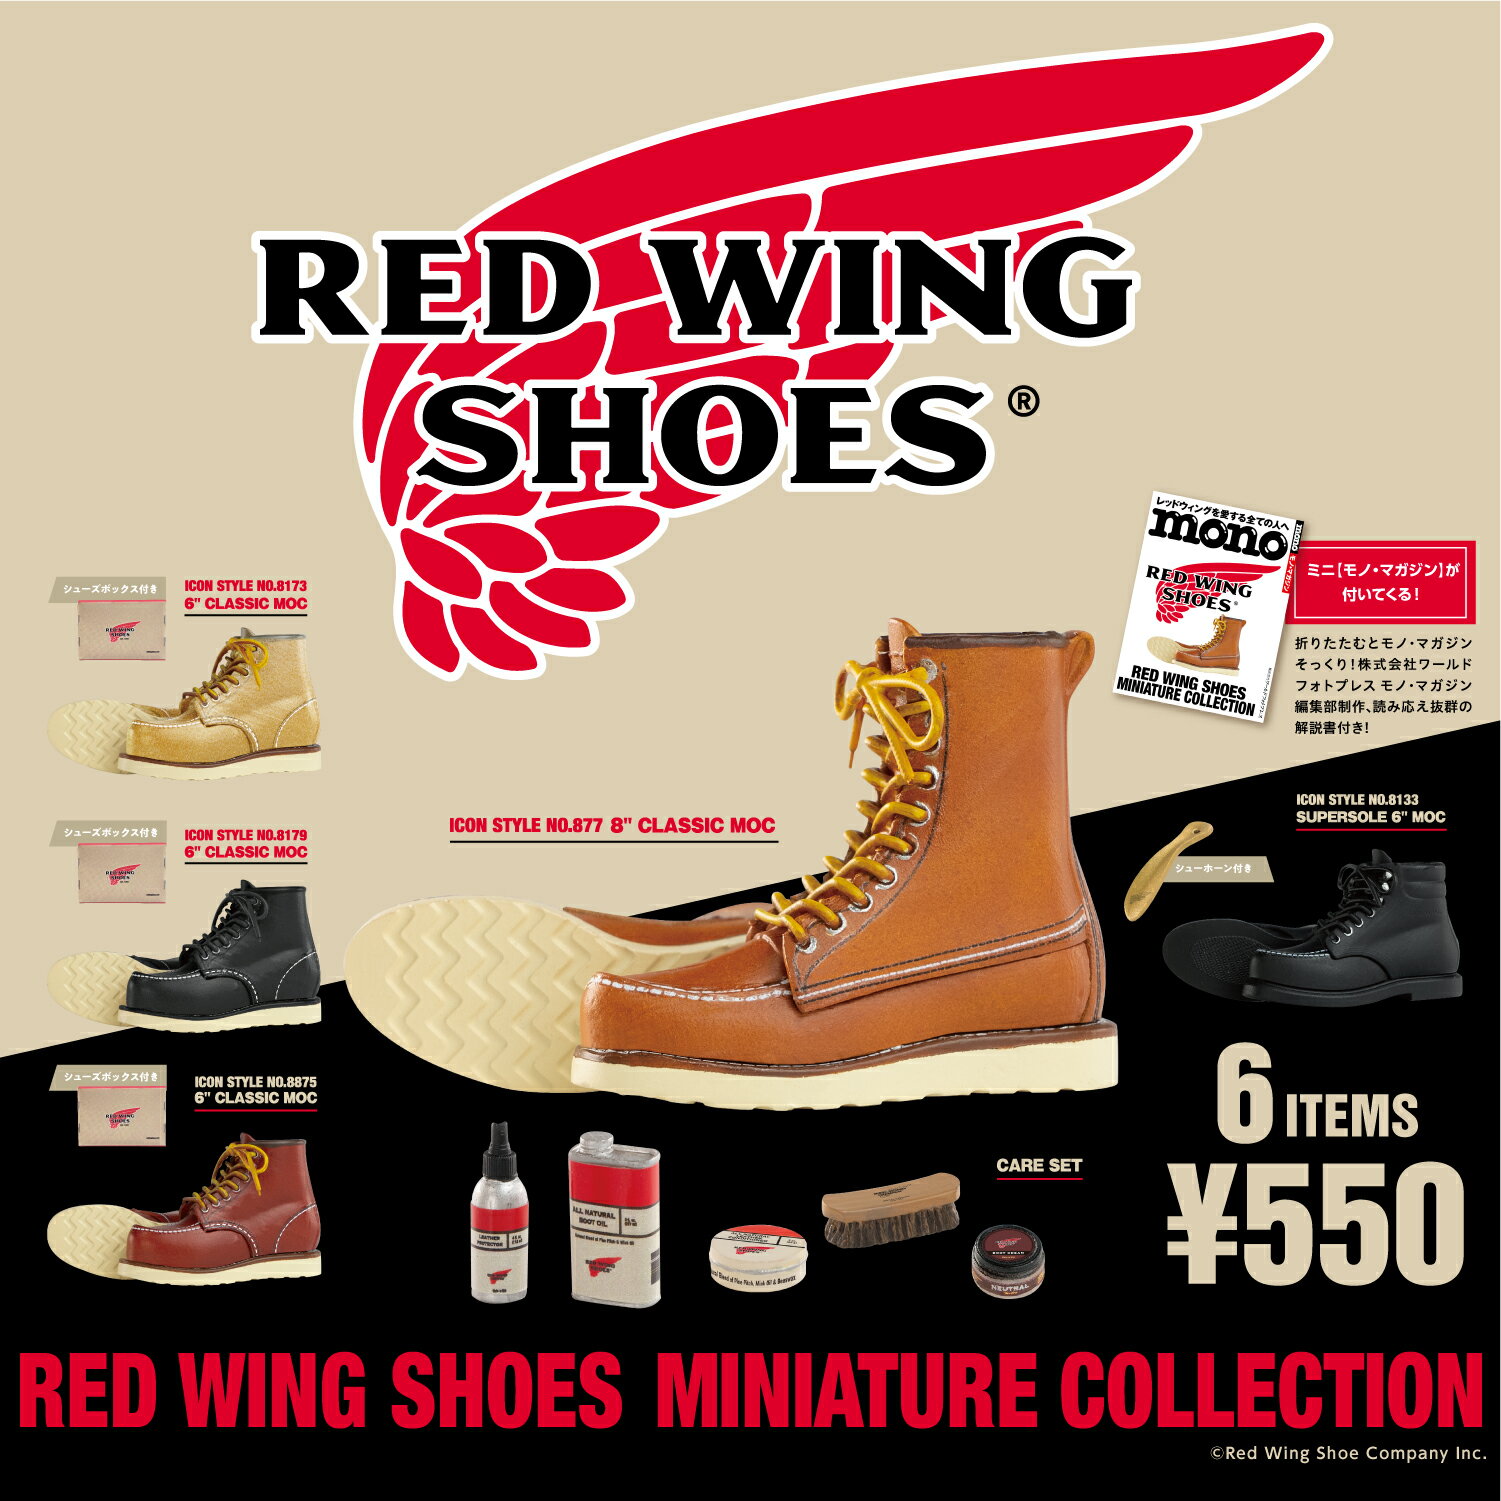 RED WING SHOES MINIATURE COLLECTION　8個パック